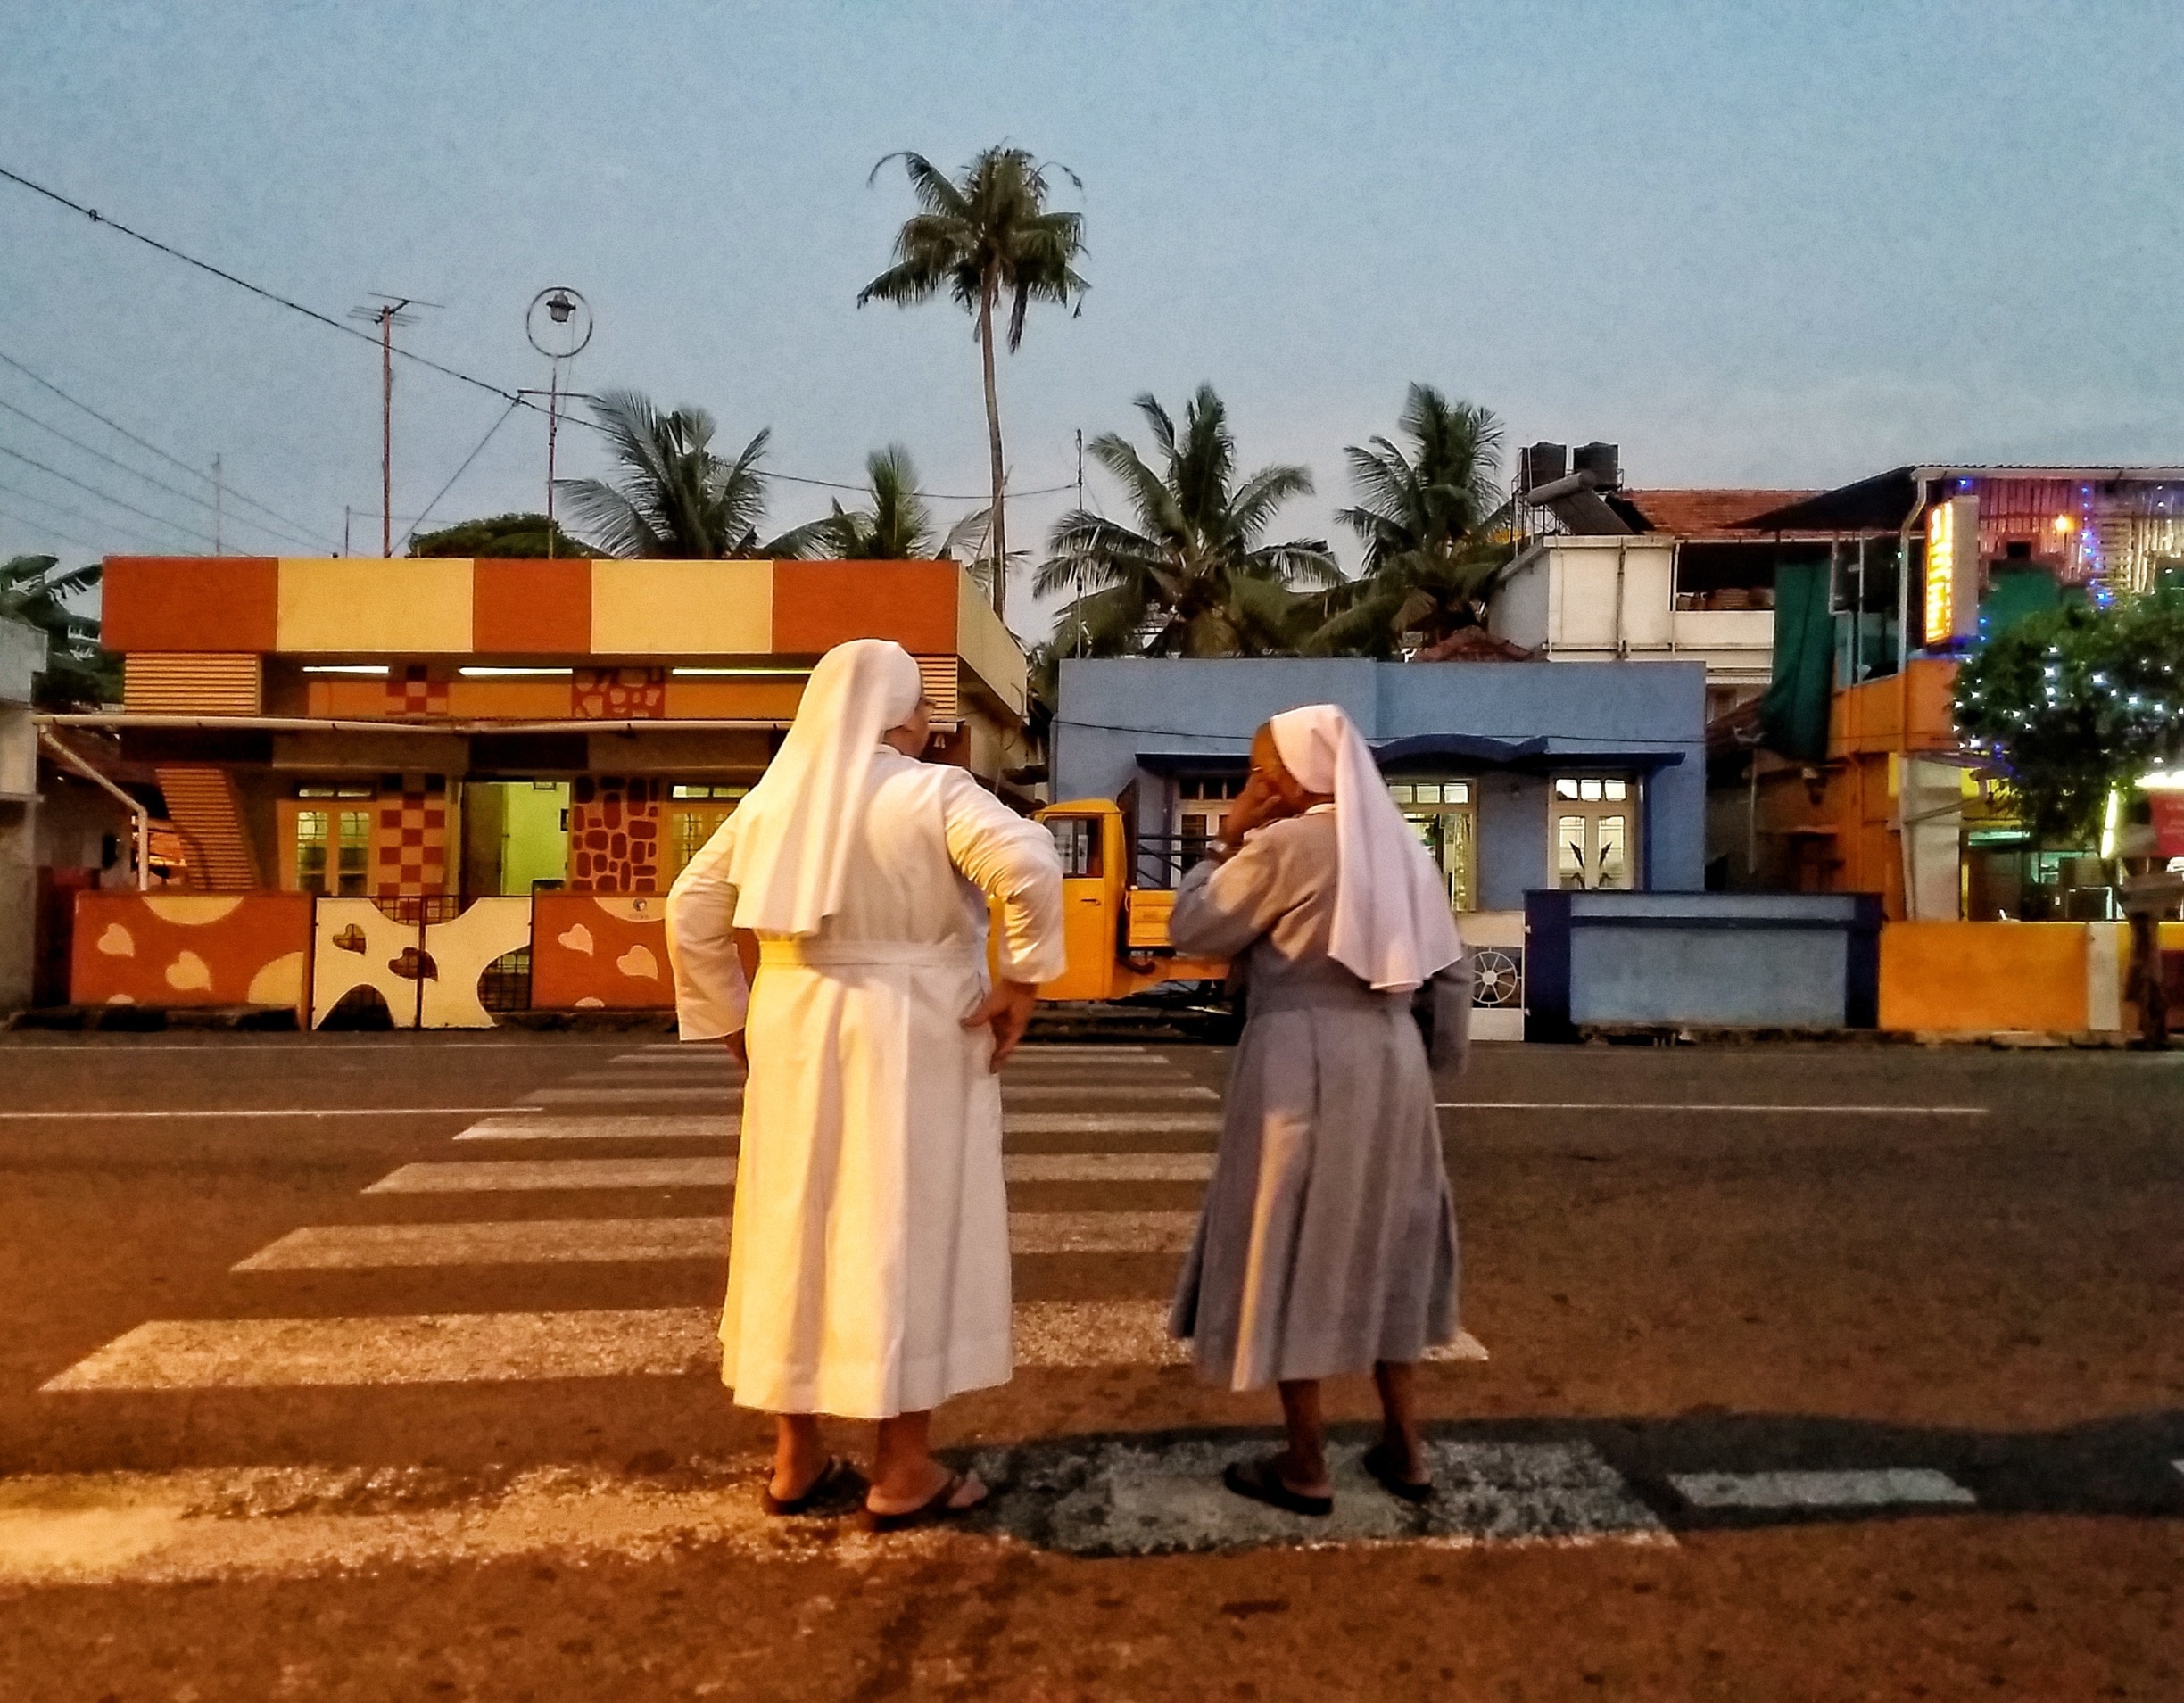 What are we going to do tonight sister?

Nuns in Fort Kochi